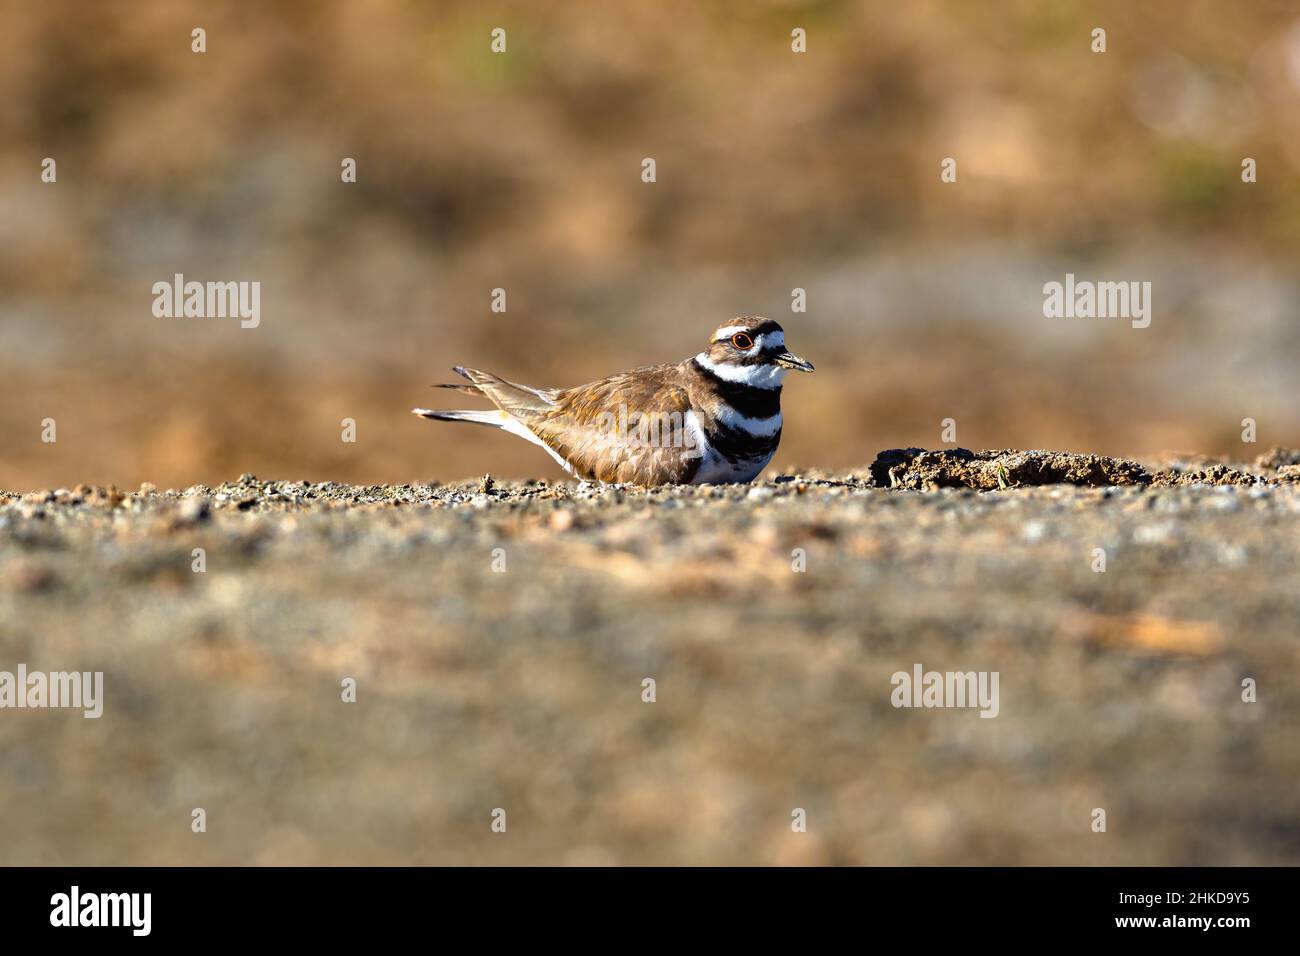 Closeup of a Killdeer bird, a ground nesting species, lying on the ground along a flat stretch of earthy gravel, photographed at eye level. Stock Photo